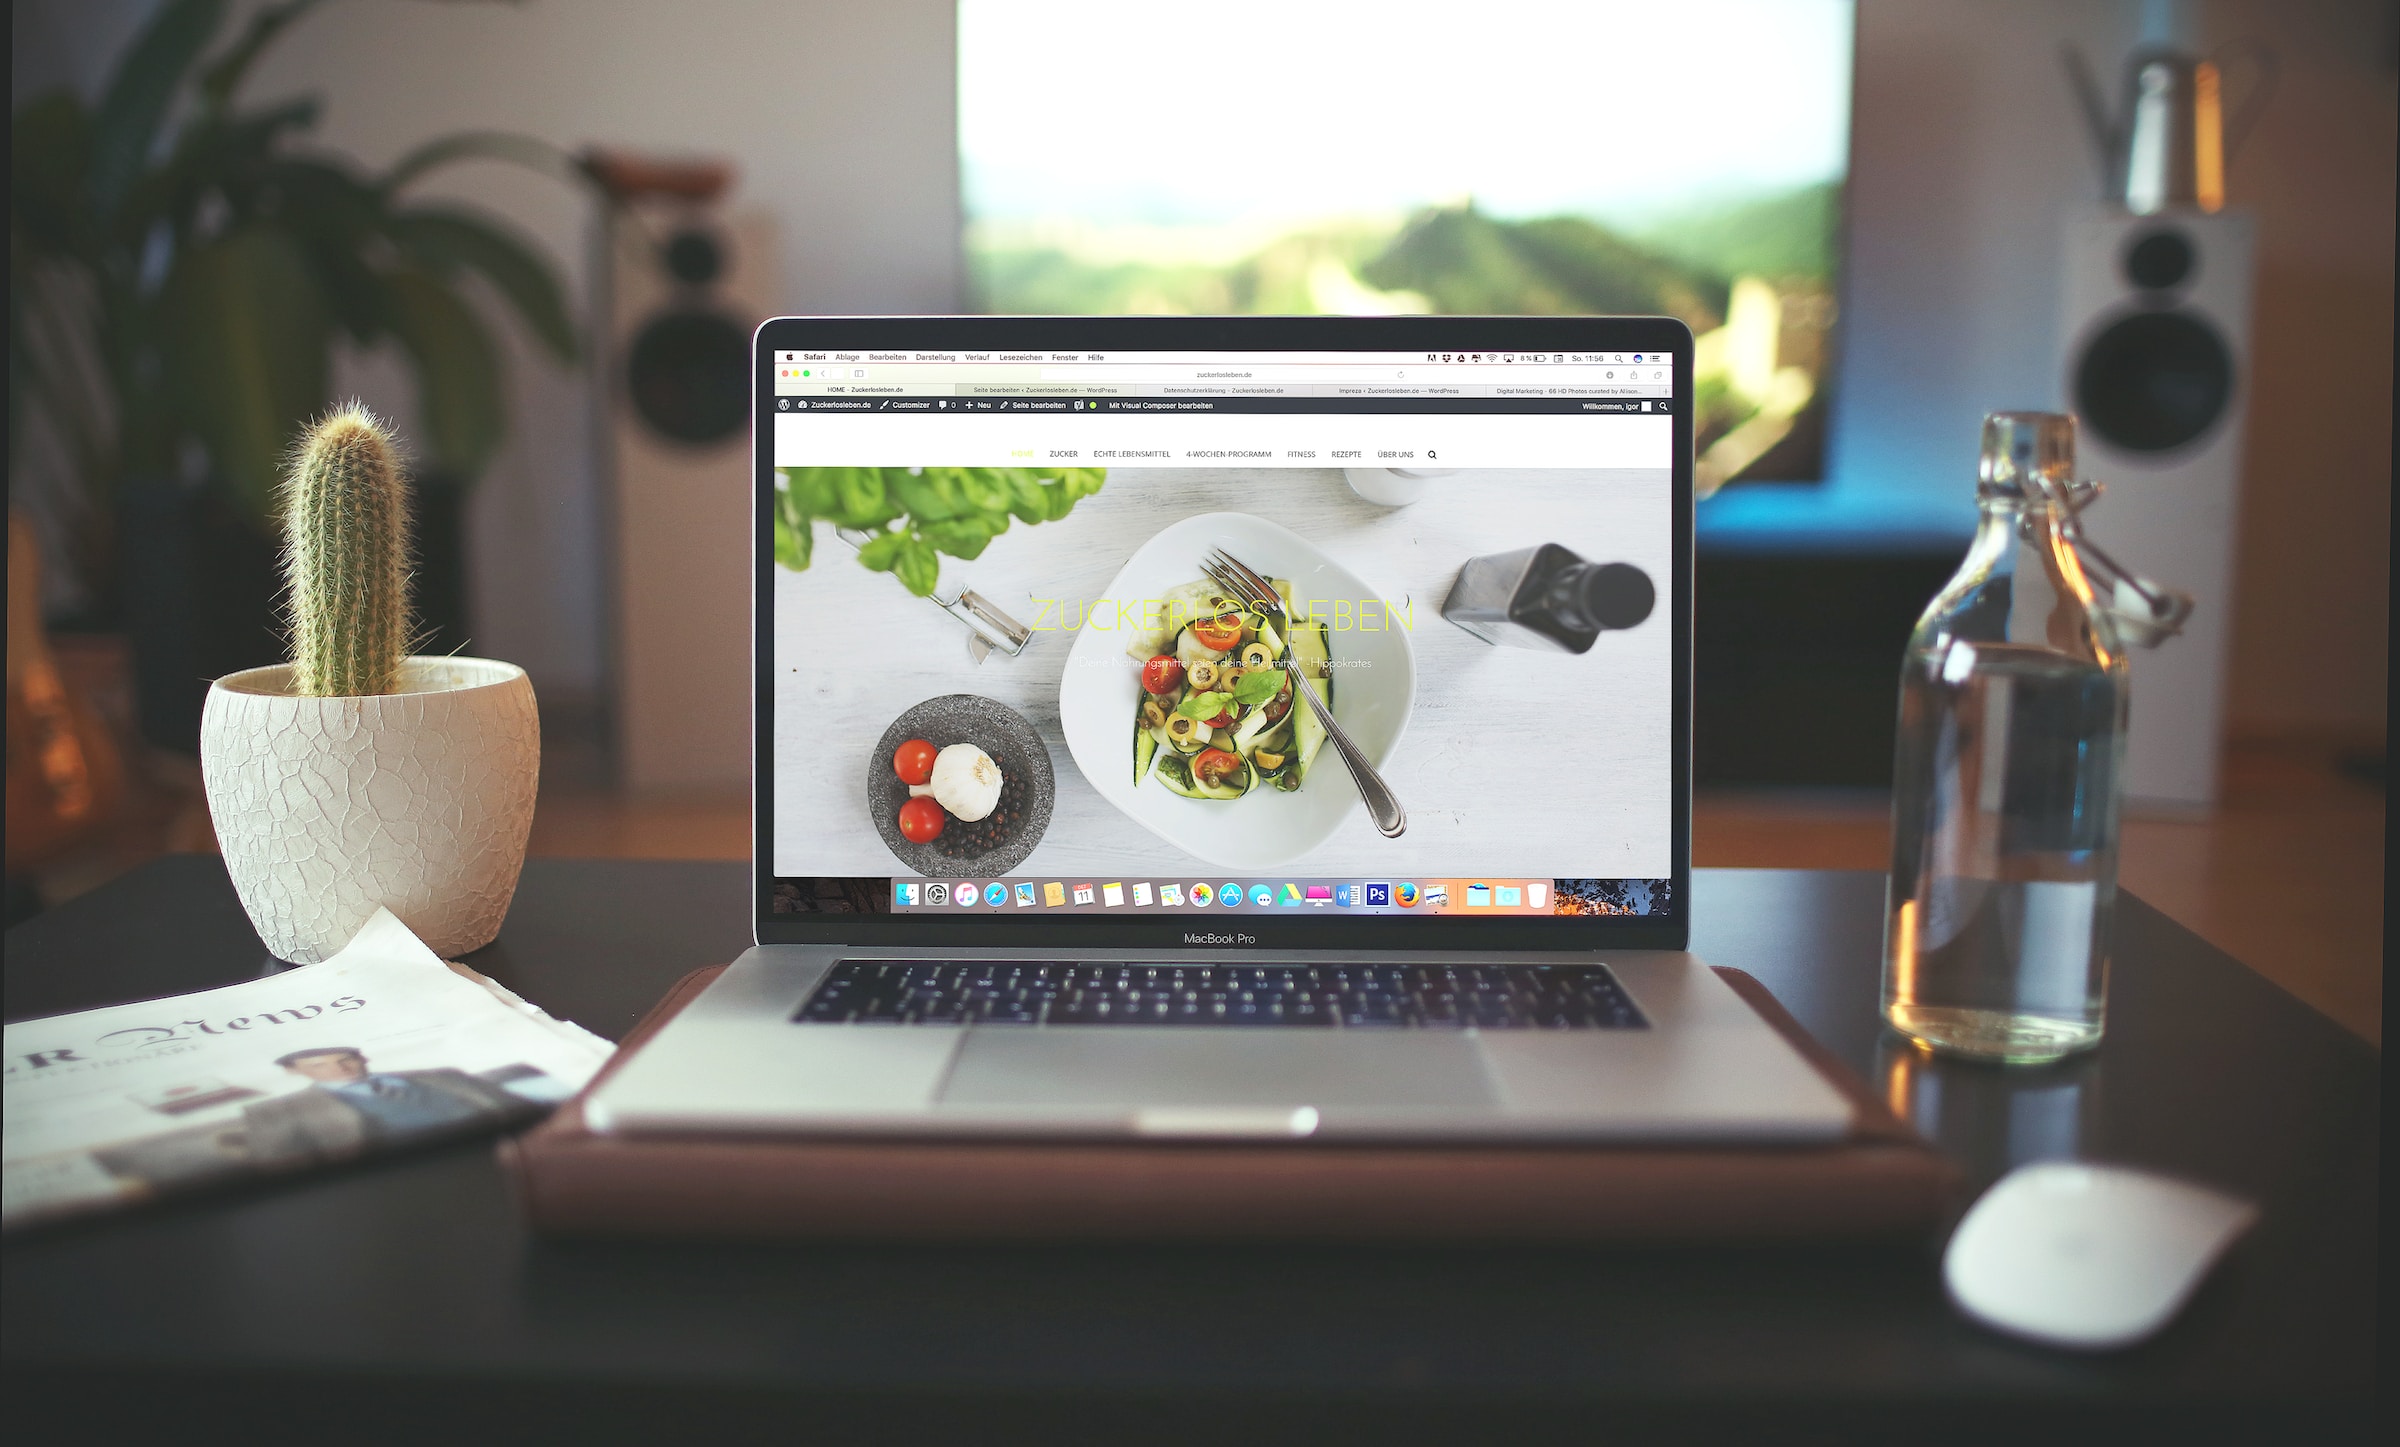 restaurant website page shown on laptop sitting on table with cactus and lamp